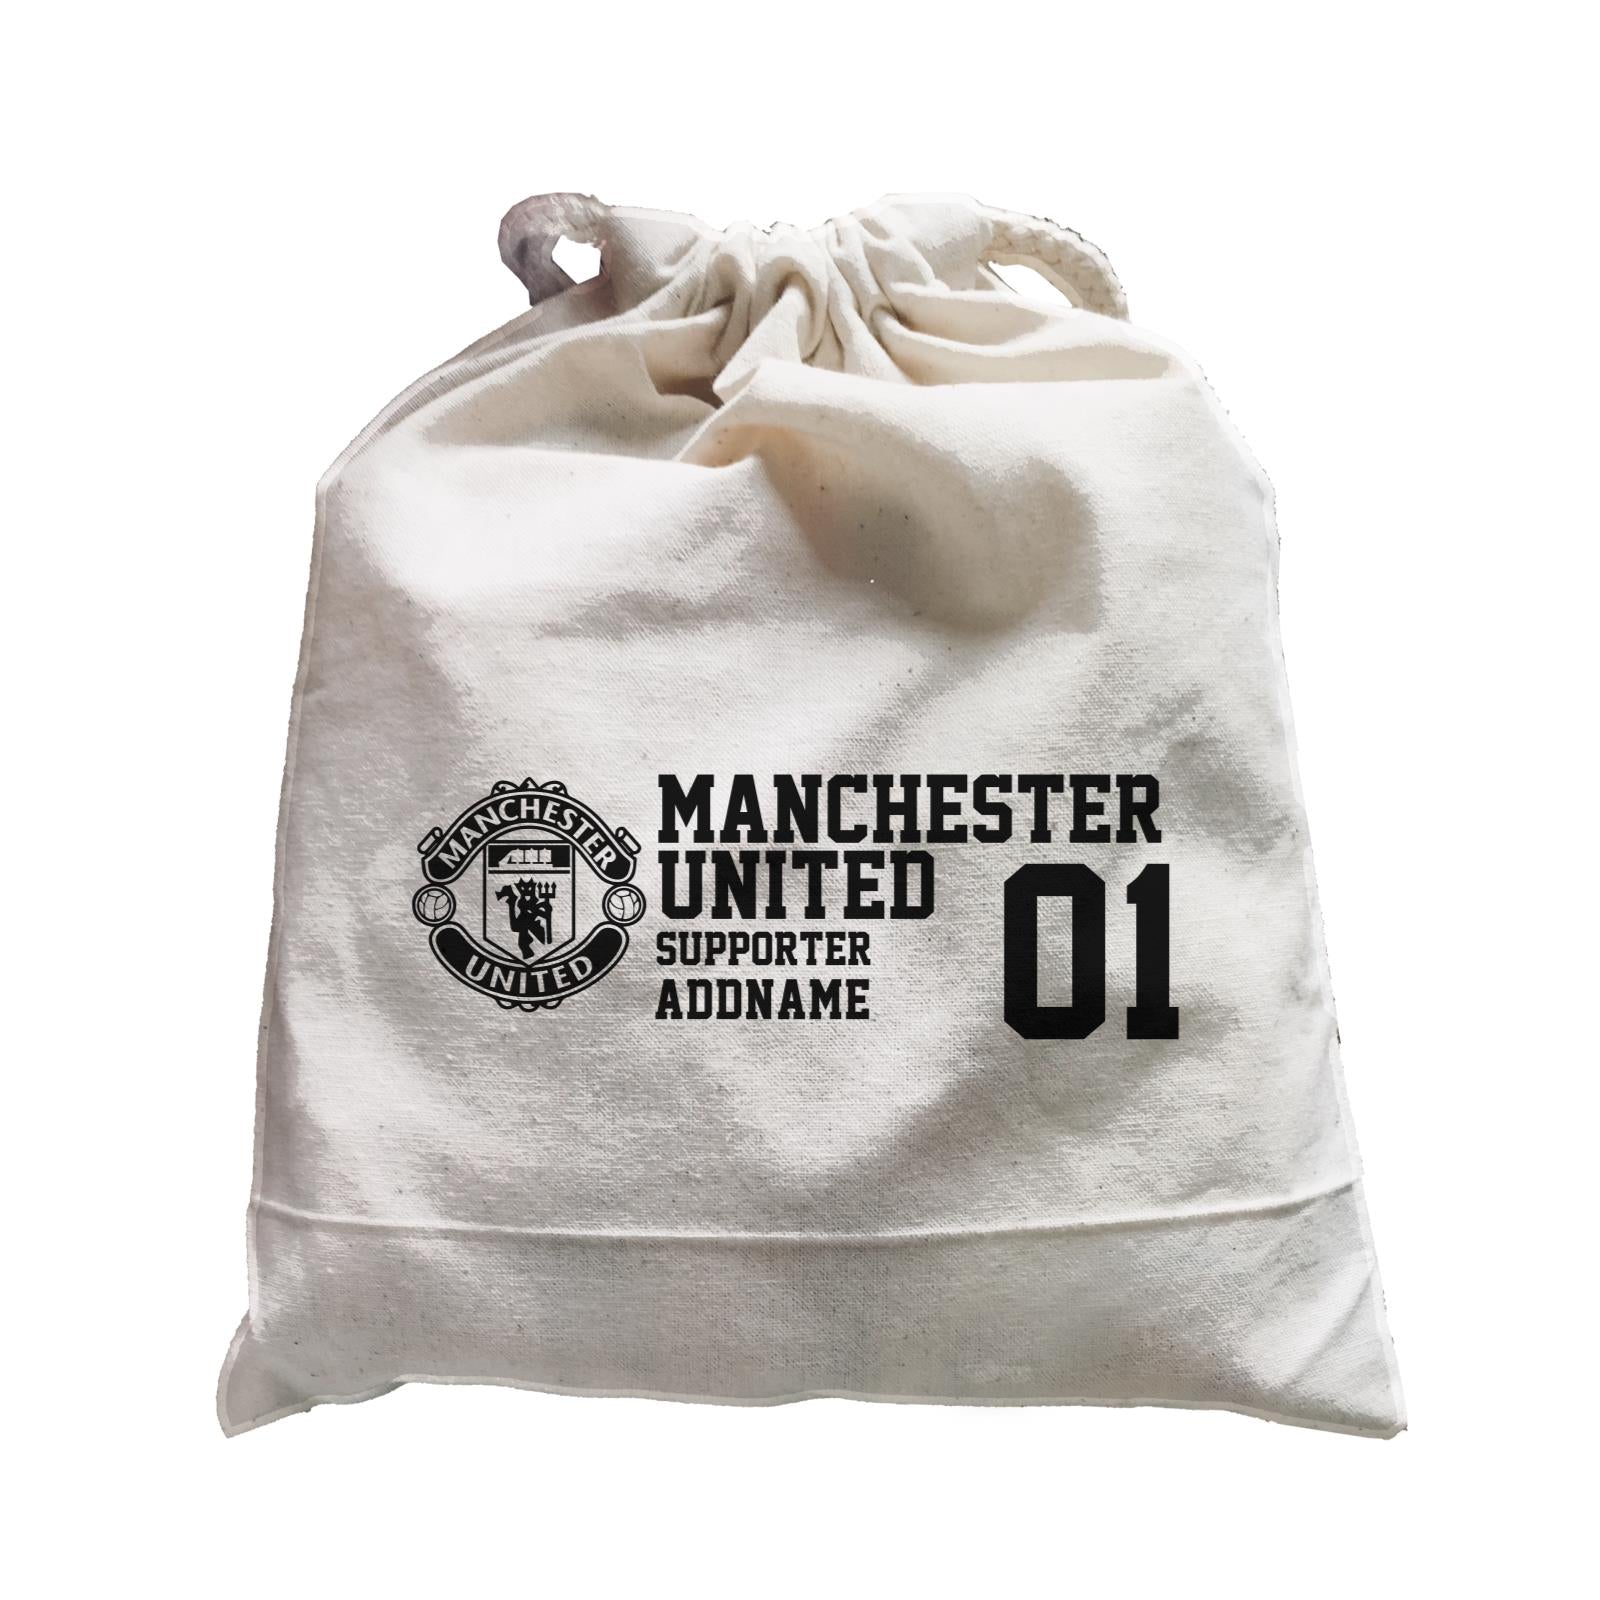 Manchester United Football Supporter Accessories Addname Satchel